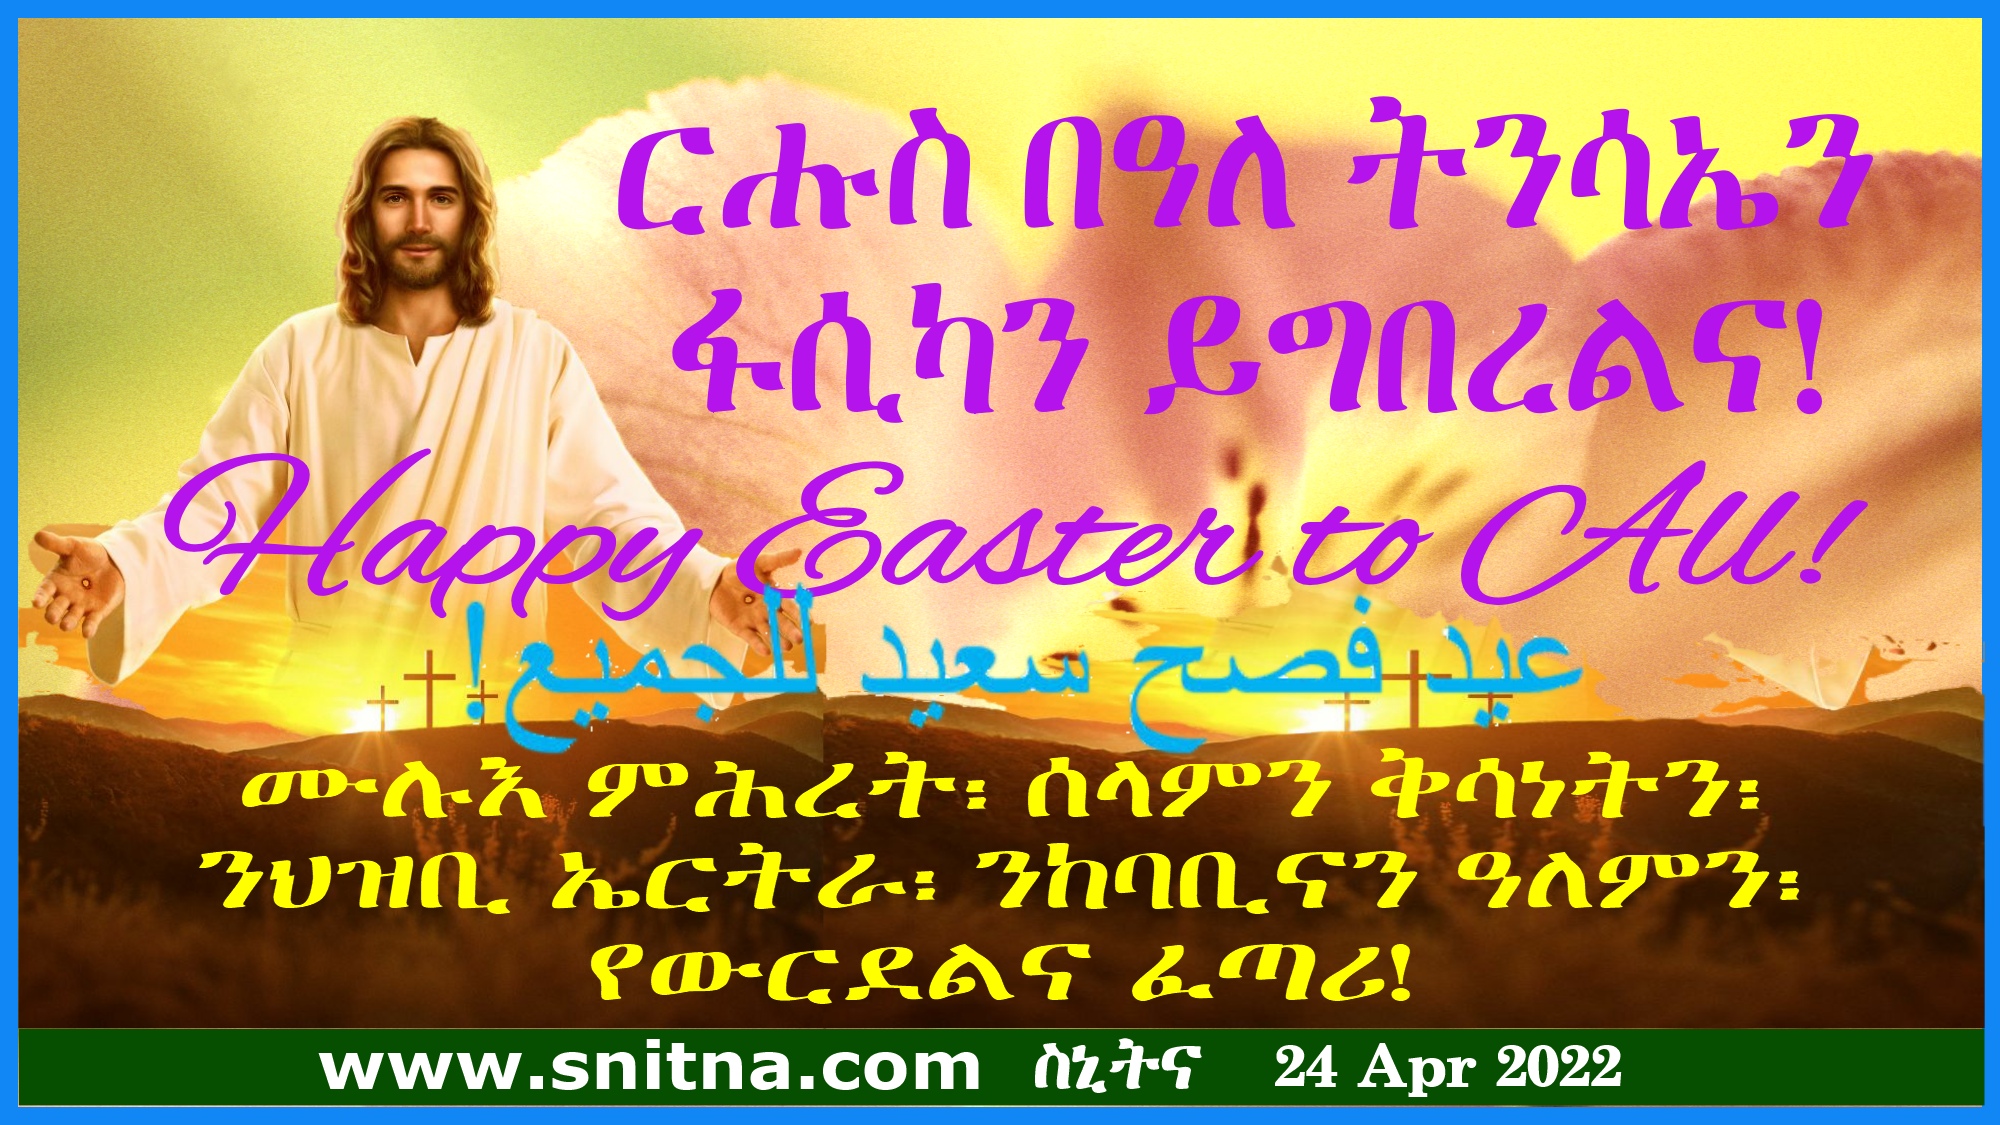 Happy Easter to All! from snitna.com.